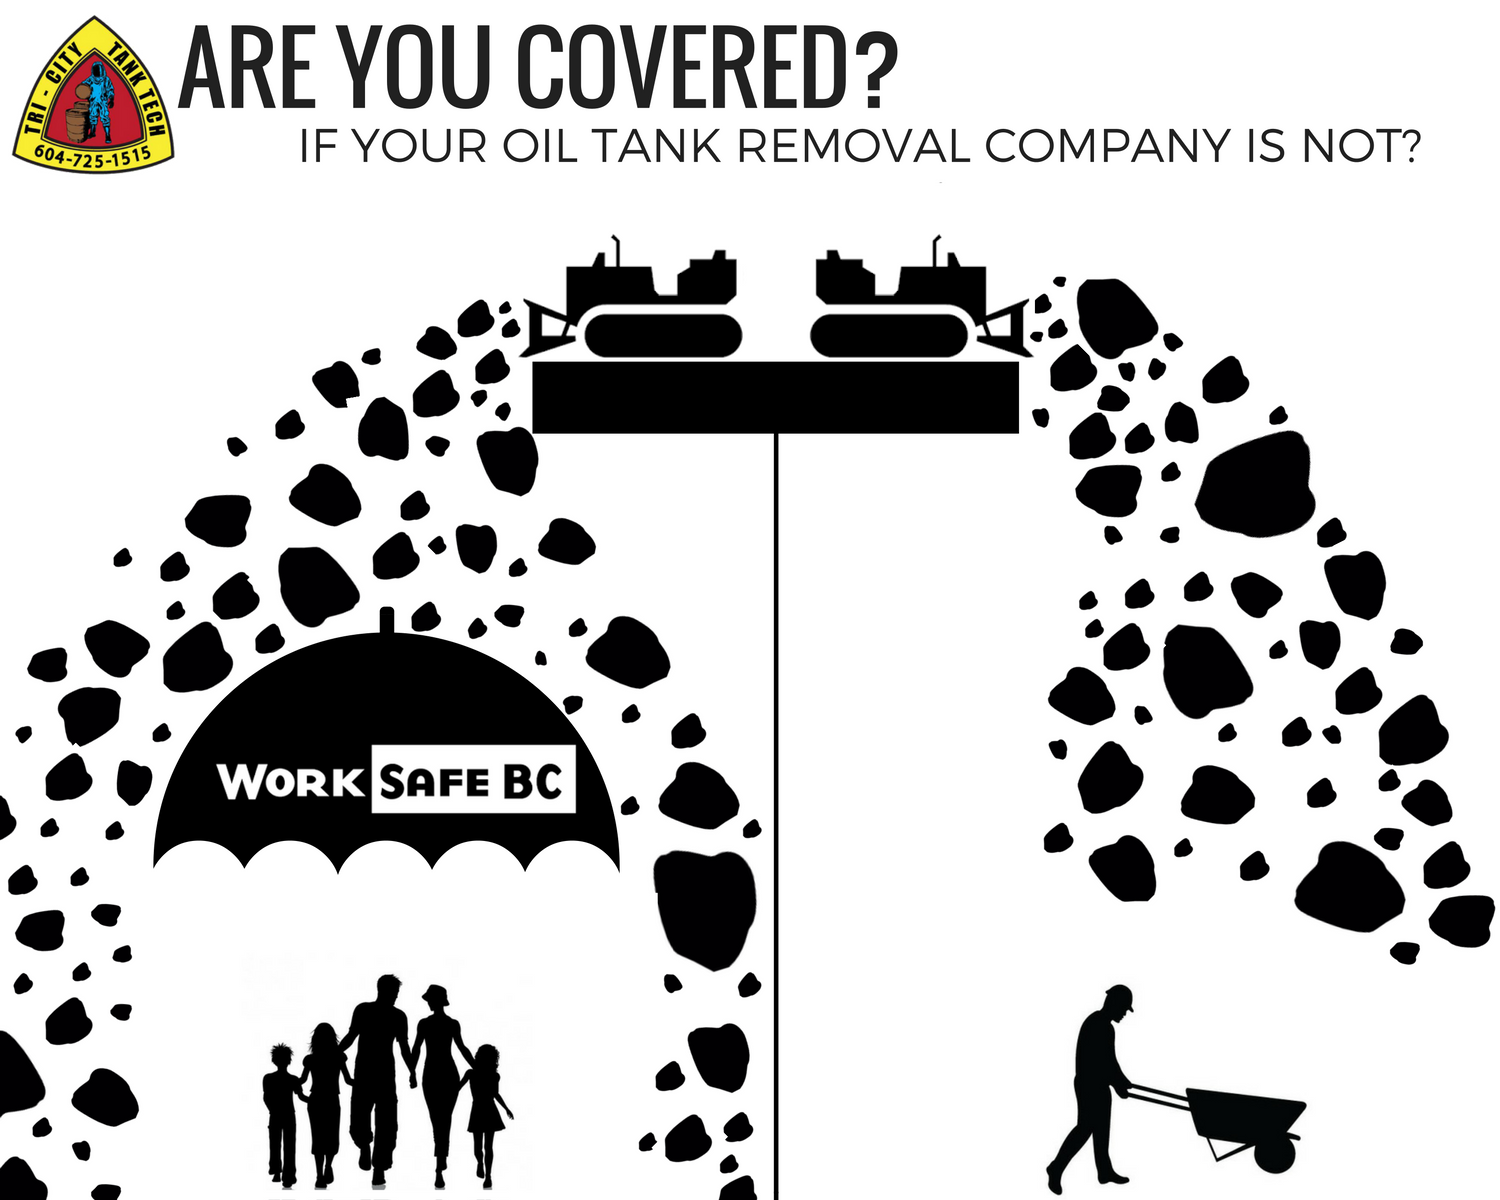 oil-tank-removal-are-you-covered-worksafe-bc-image